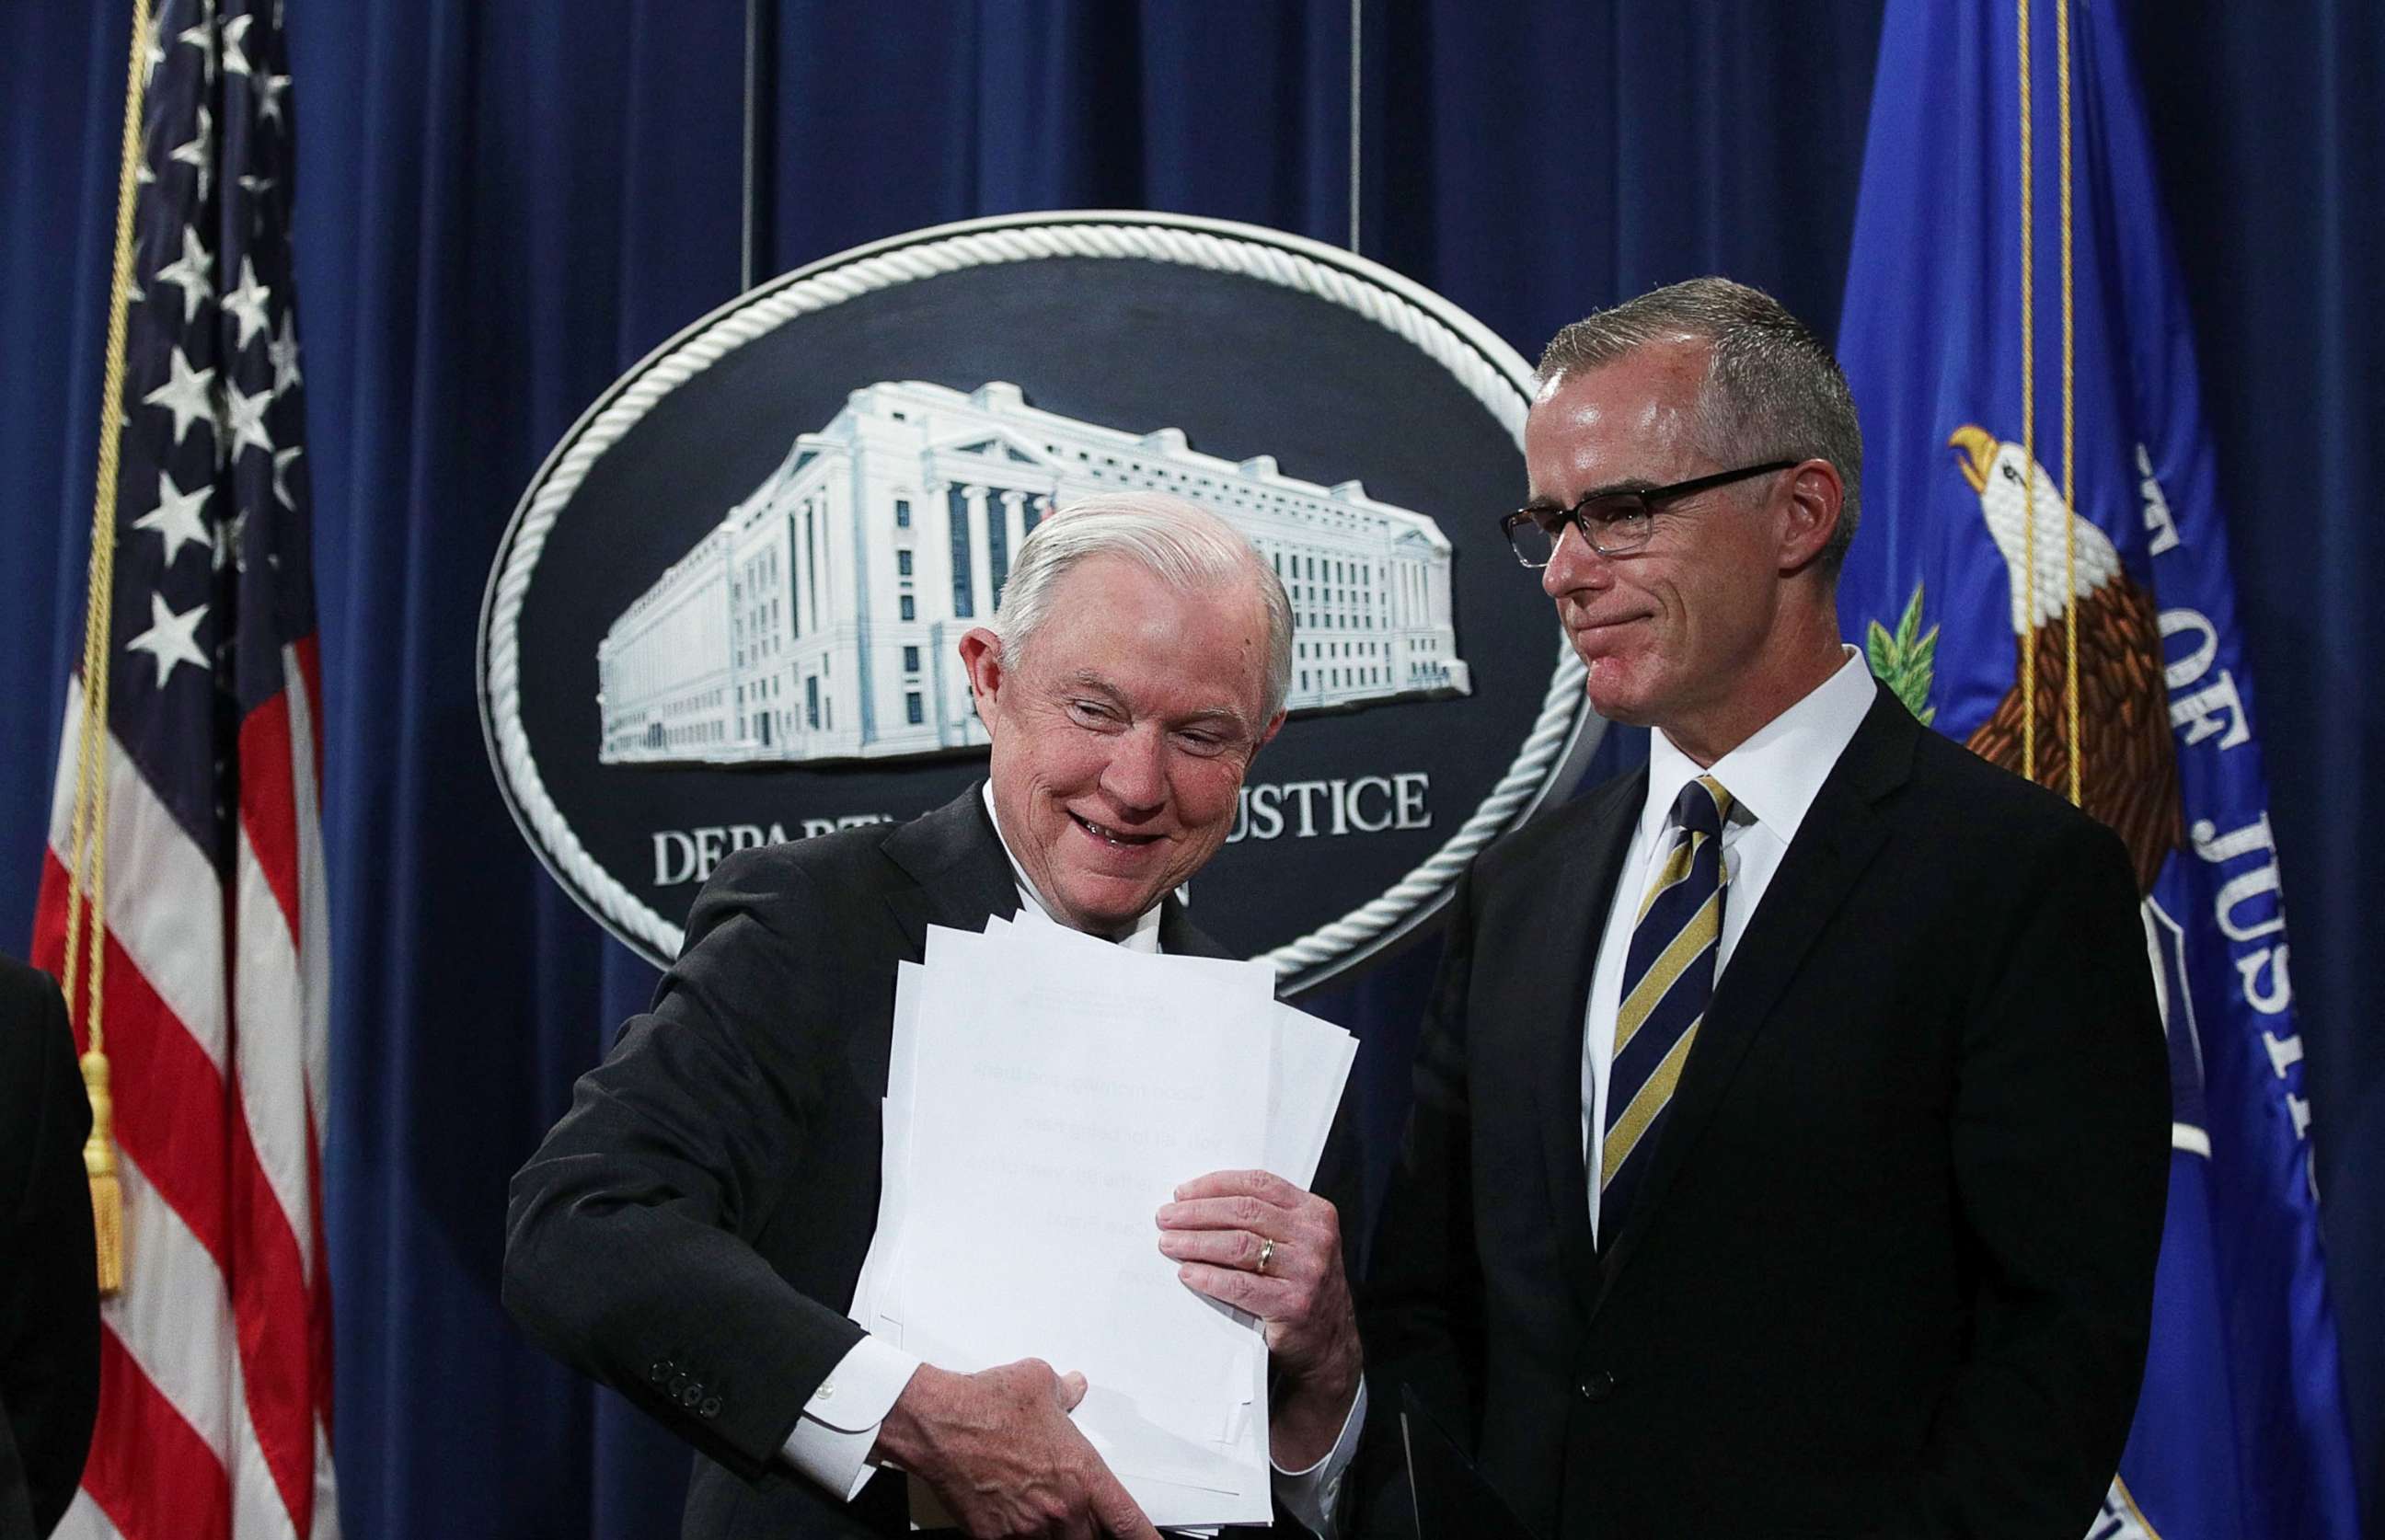 PHOTO: U.S. Attorney General Jeff Sessions picks up his remarks as Acting FBI Director Andrew McCabe looks on during a news conference at the Justice Department in Washington, July 13, 2017.